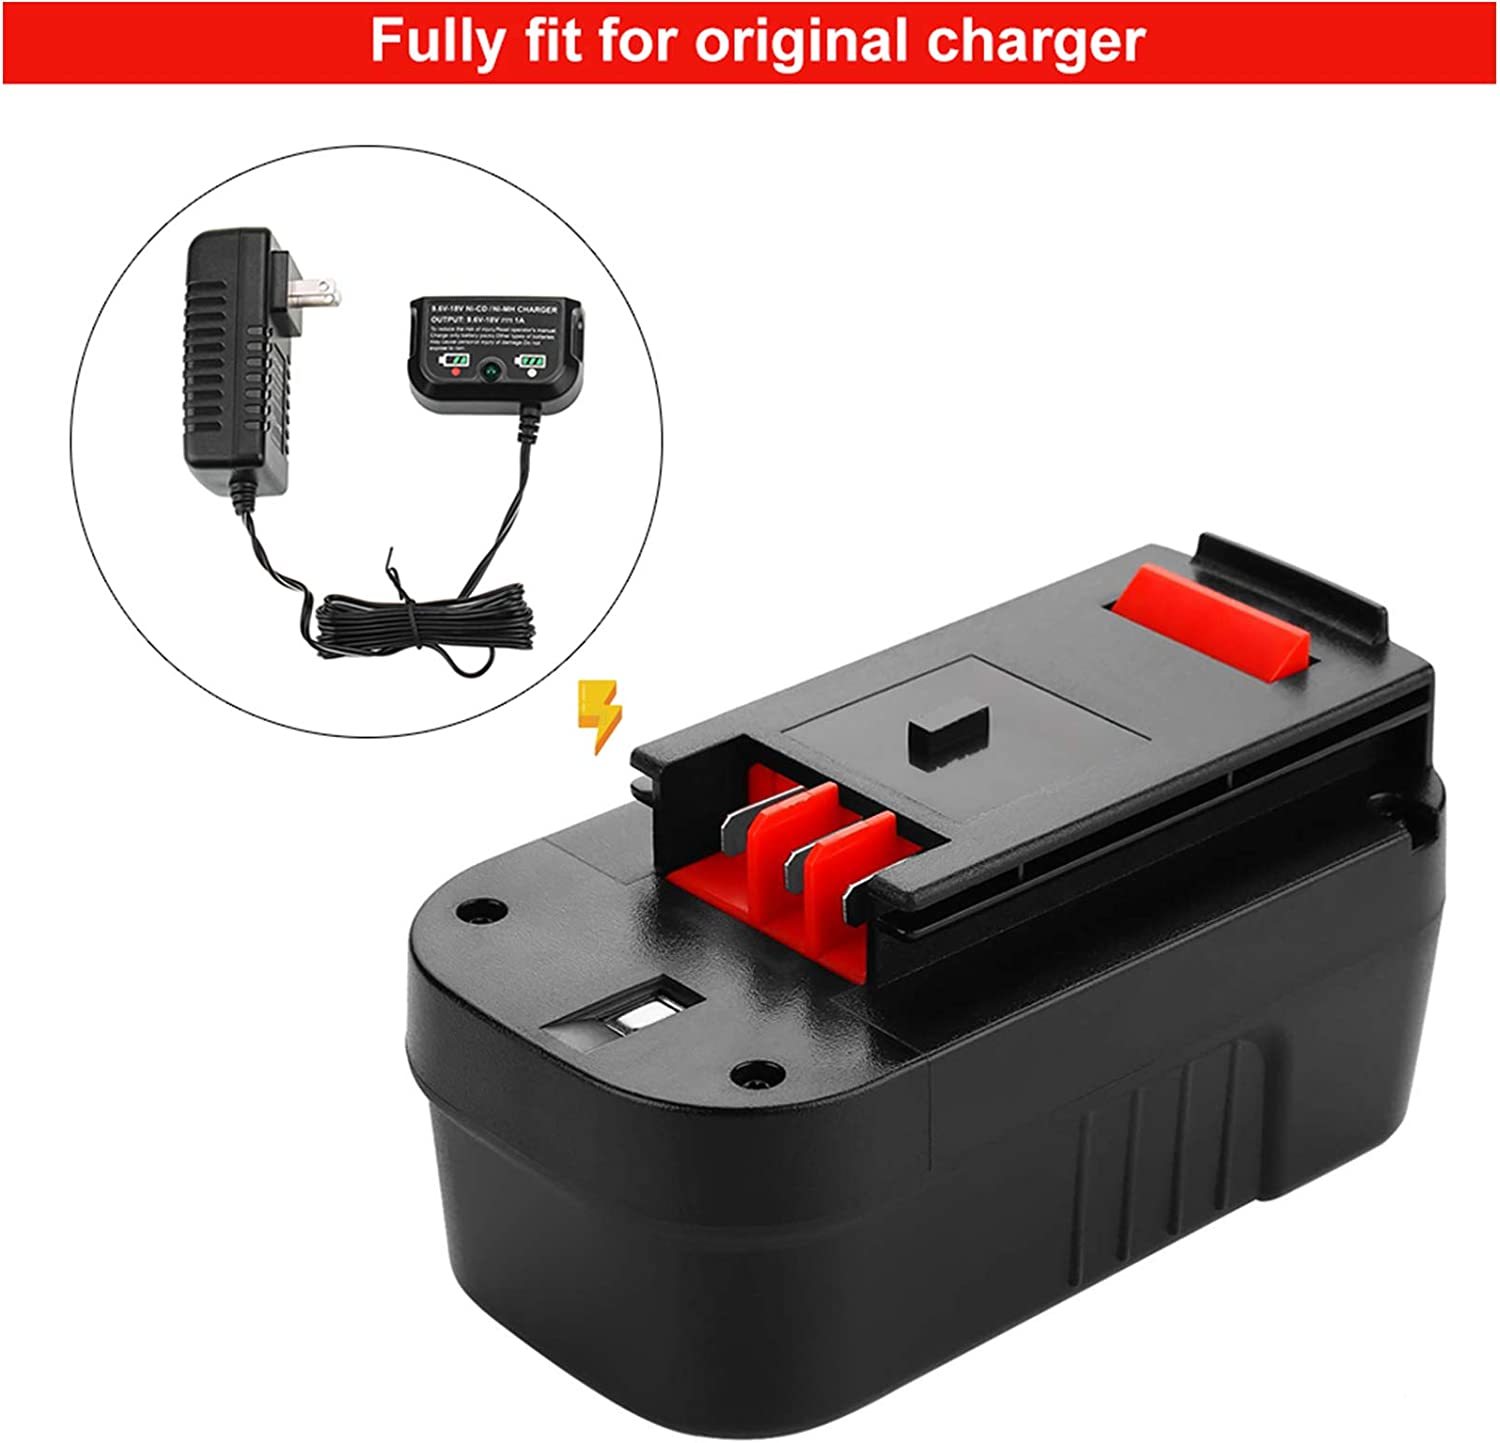 3600mAh 18Volt Replace For Black and Decker 18V Battery NiMH HPB18